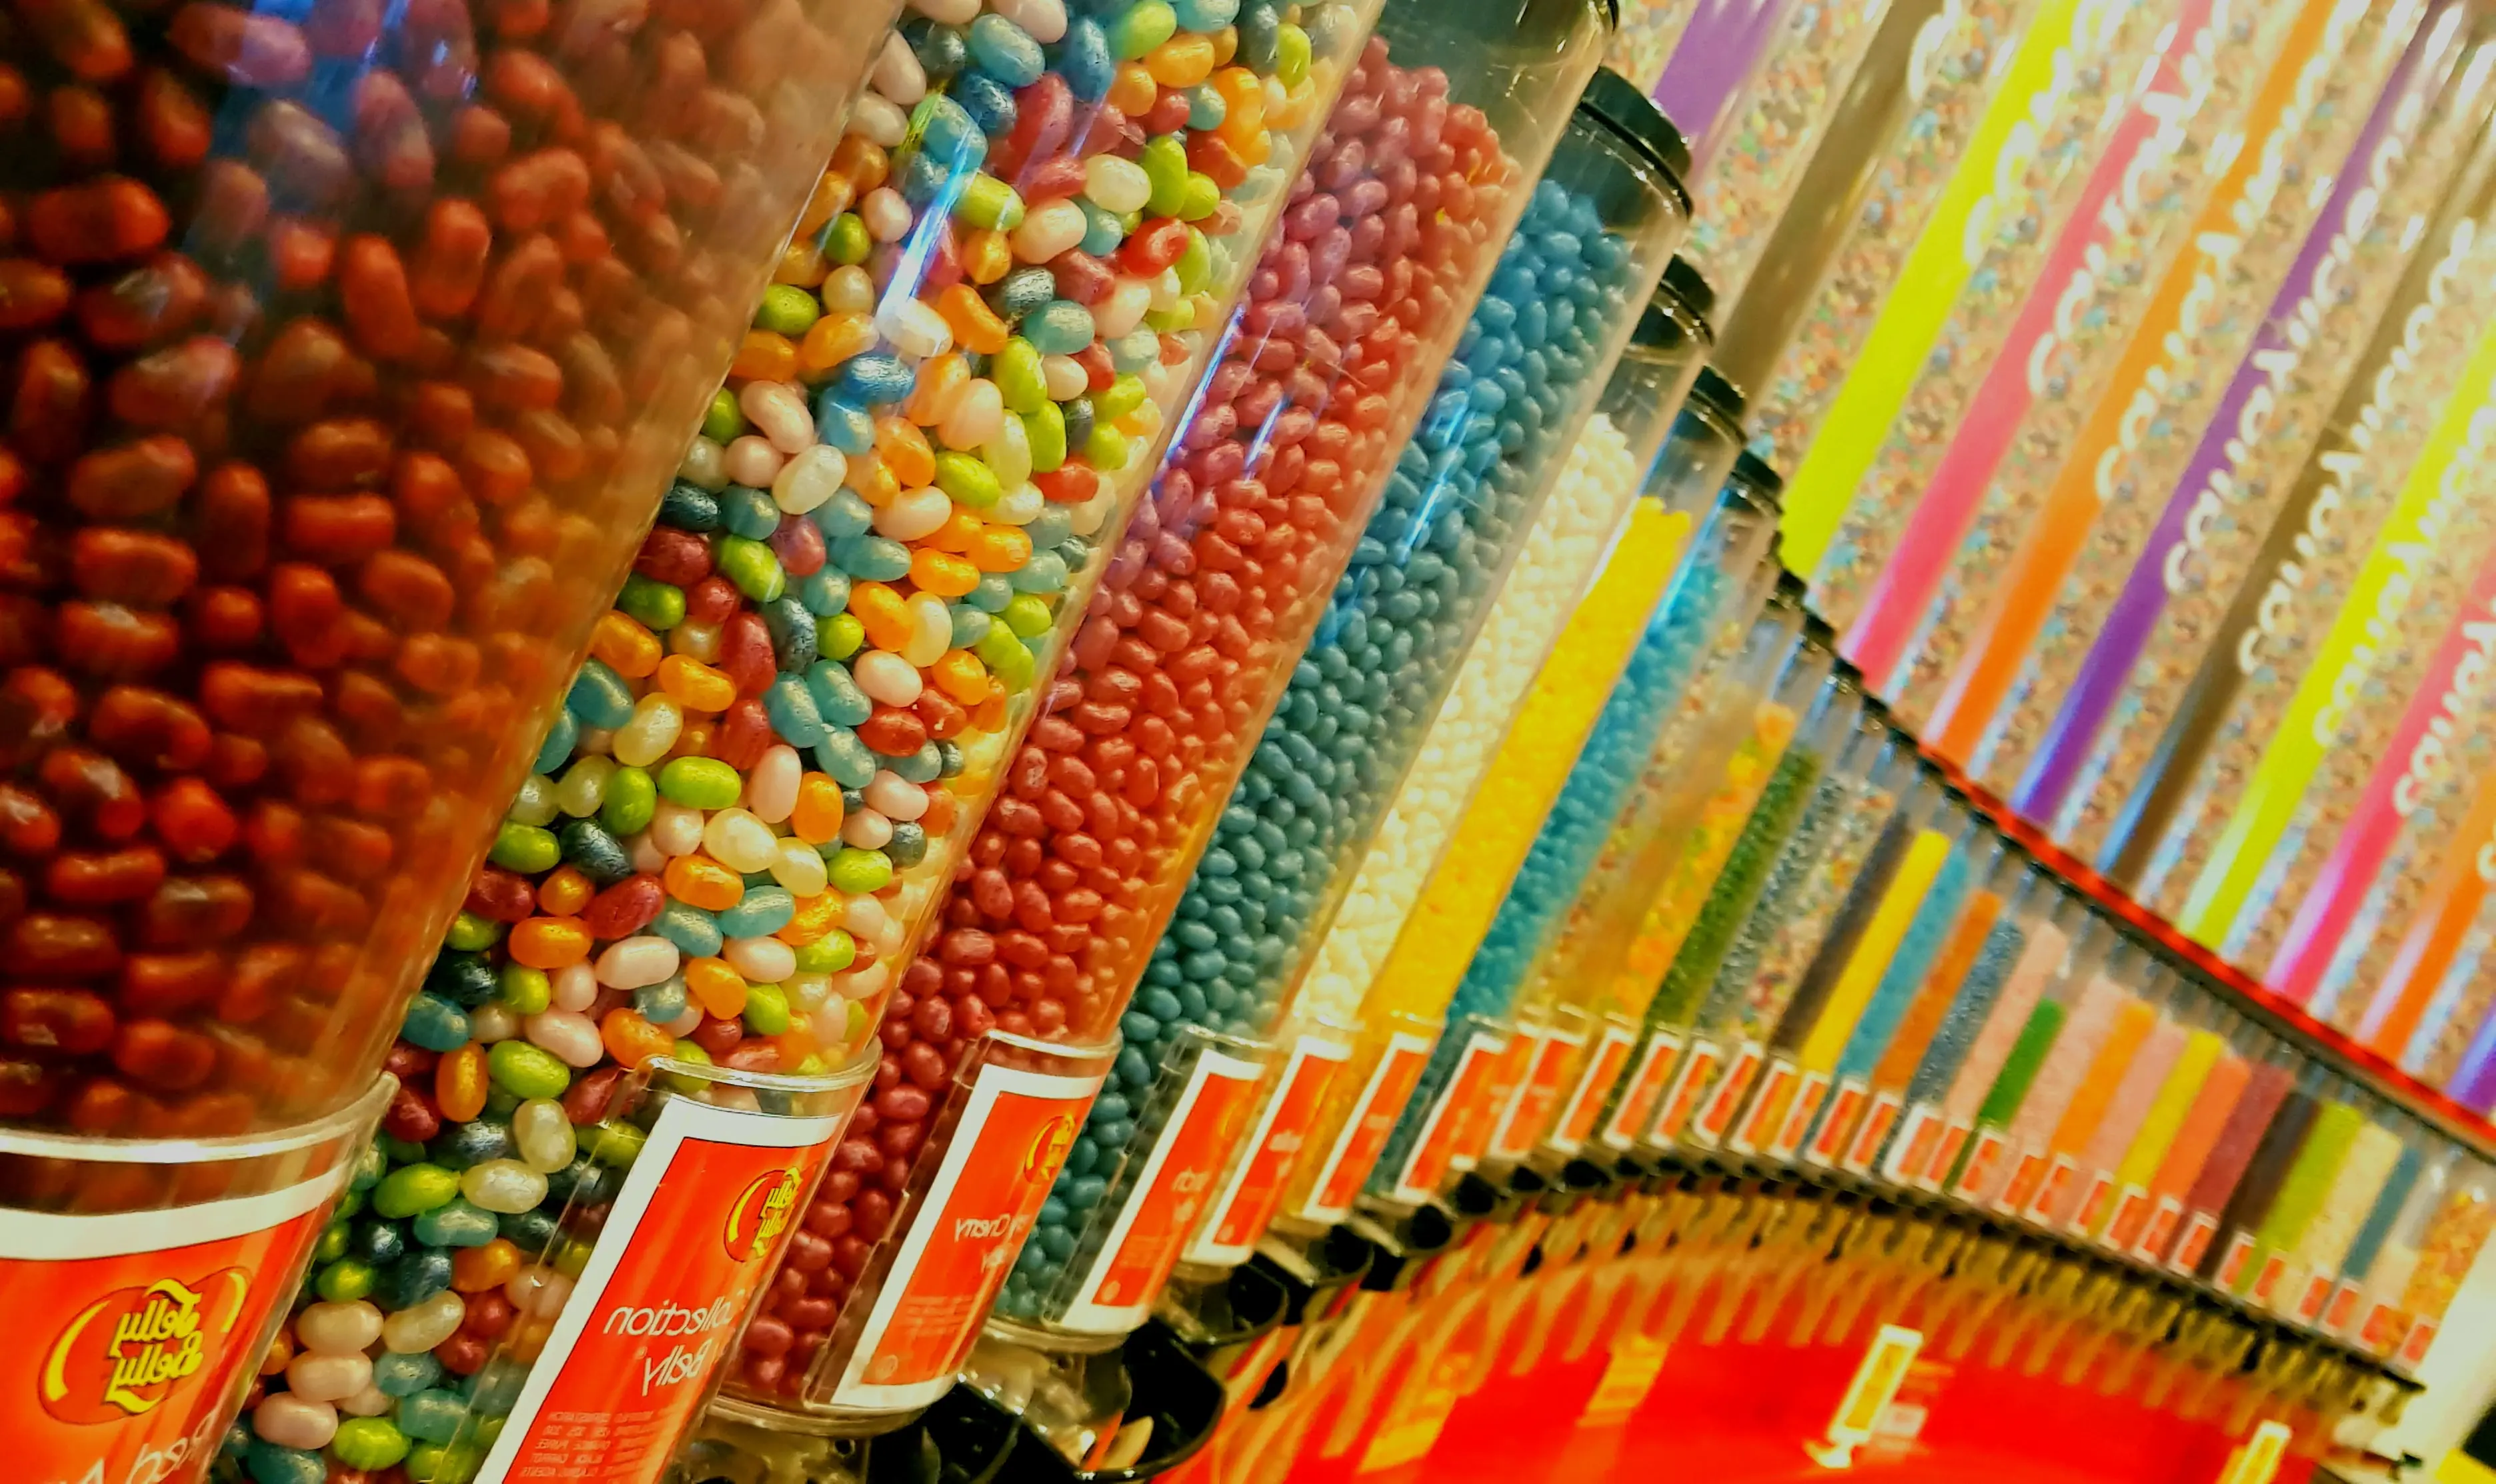 Wall of Candy Dispensers Filled with Candy